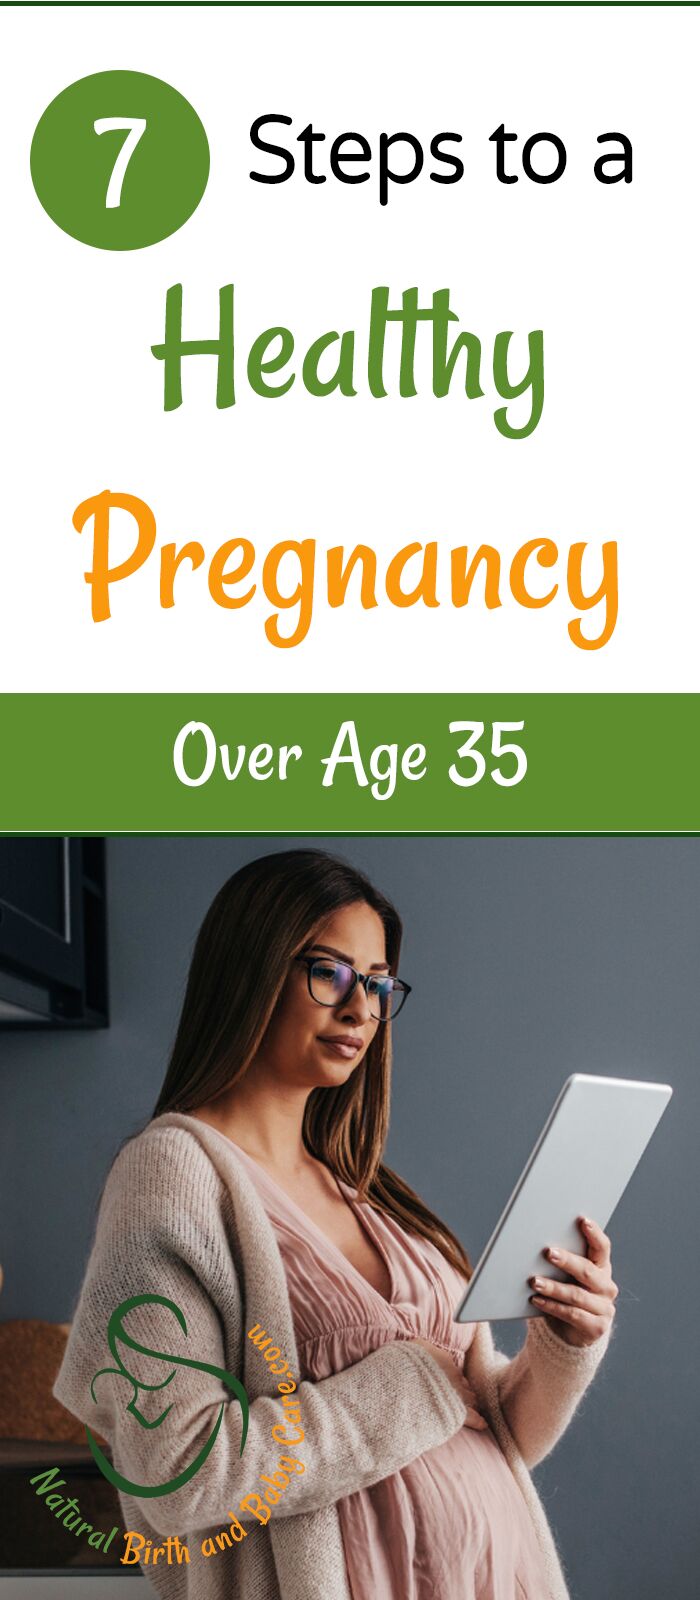 Pregnant woman over 35 researches on her tablet. Article title superimposed